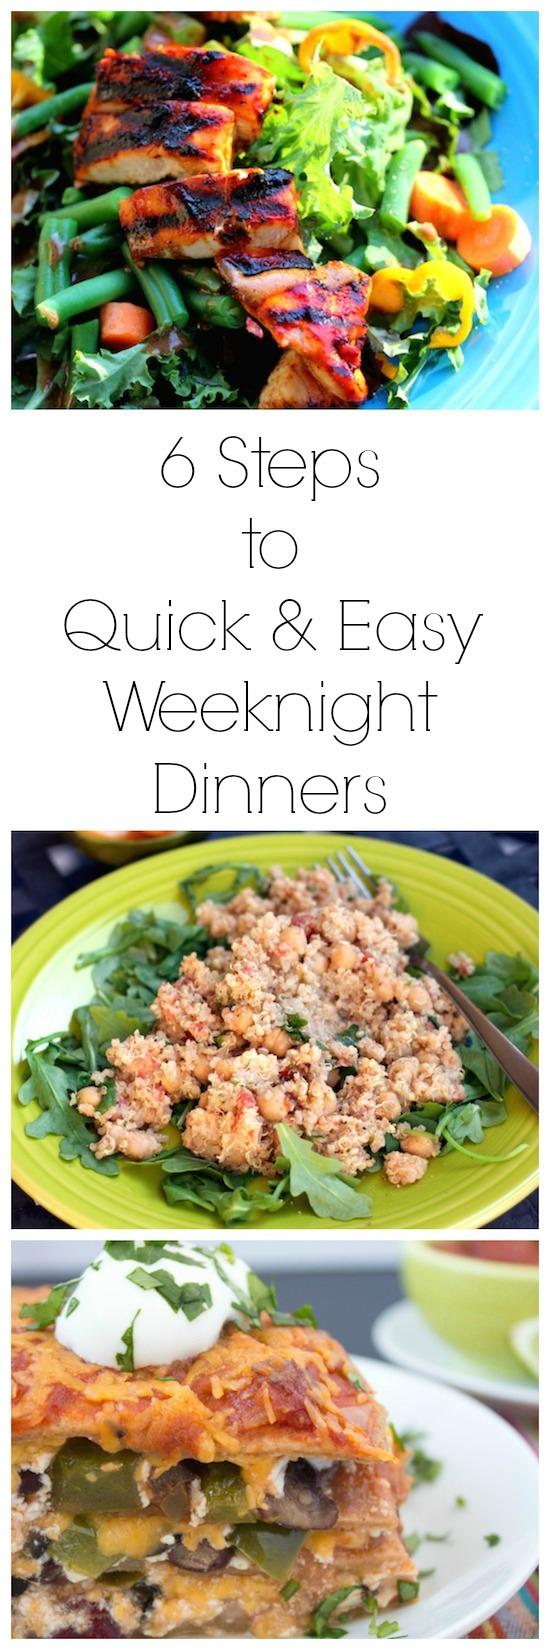 Learn the six steps to quick and easy weeknight dinners from a Registered Dietitian.